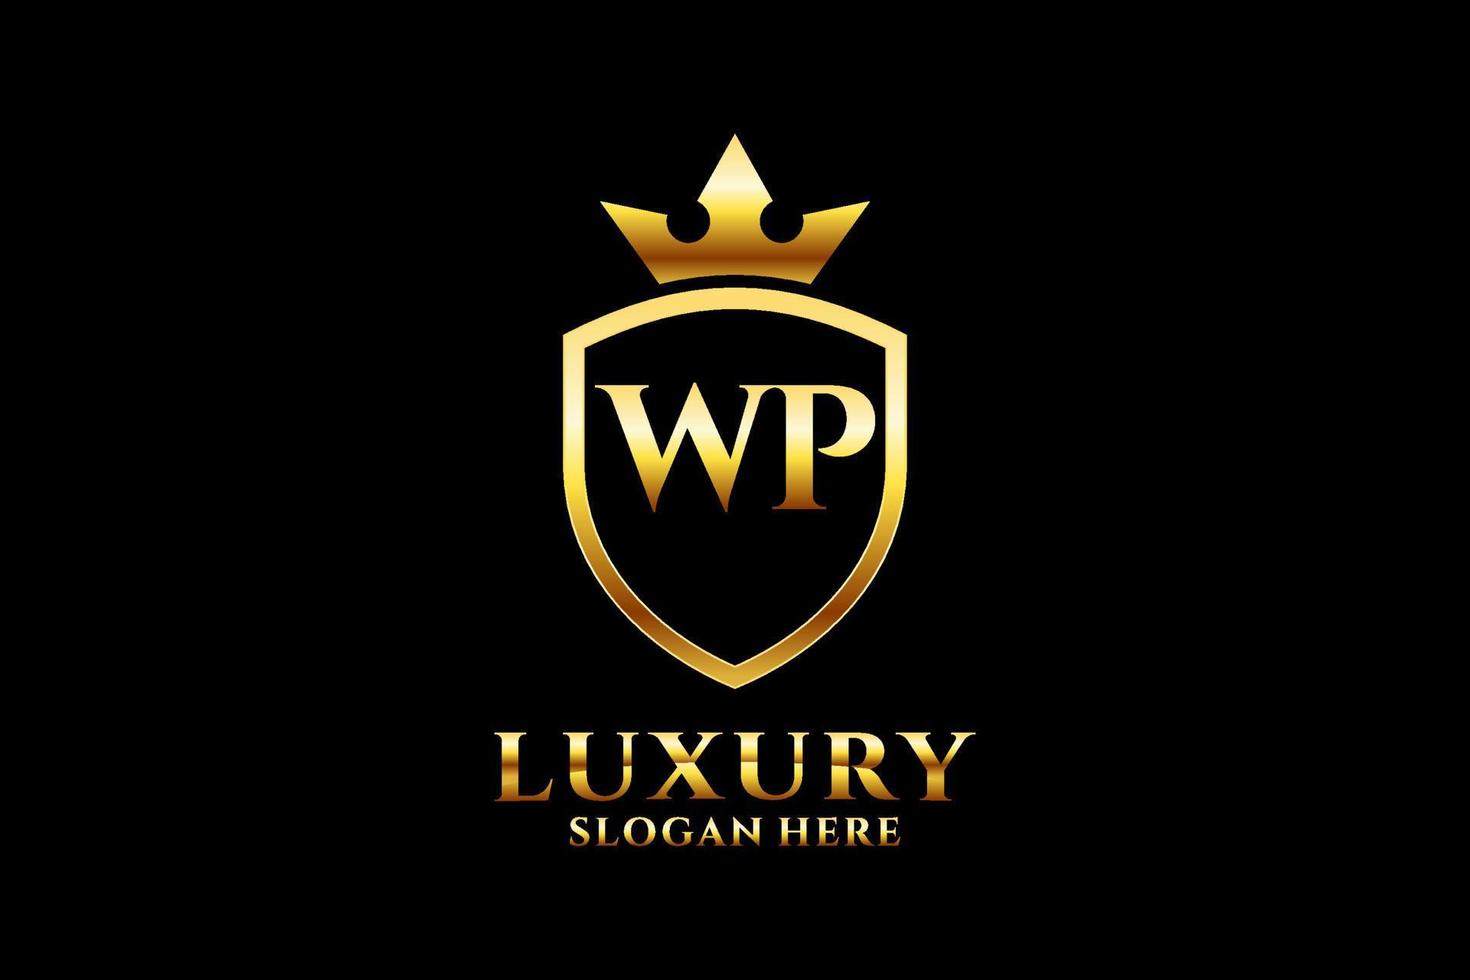 initial WP elegant luxury monogram logo or badge template with scrolls and royal crown - perfect for luxurious branding projects vector